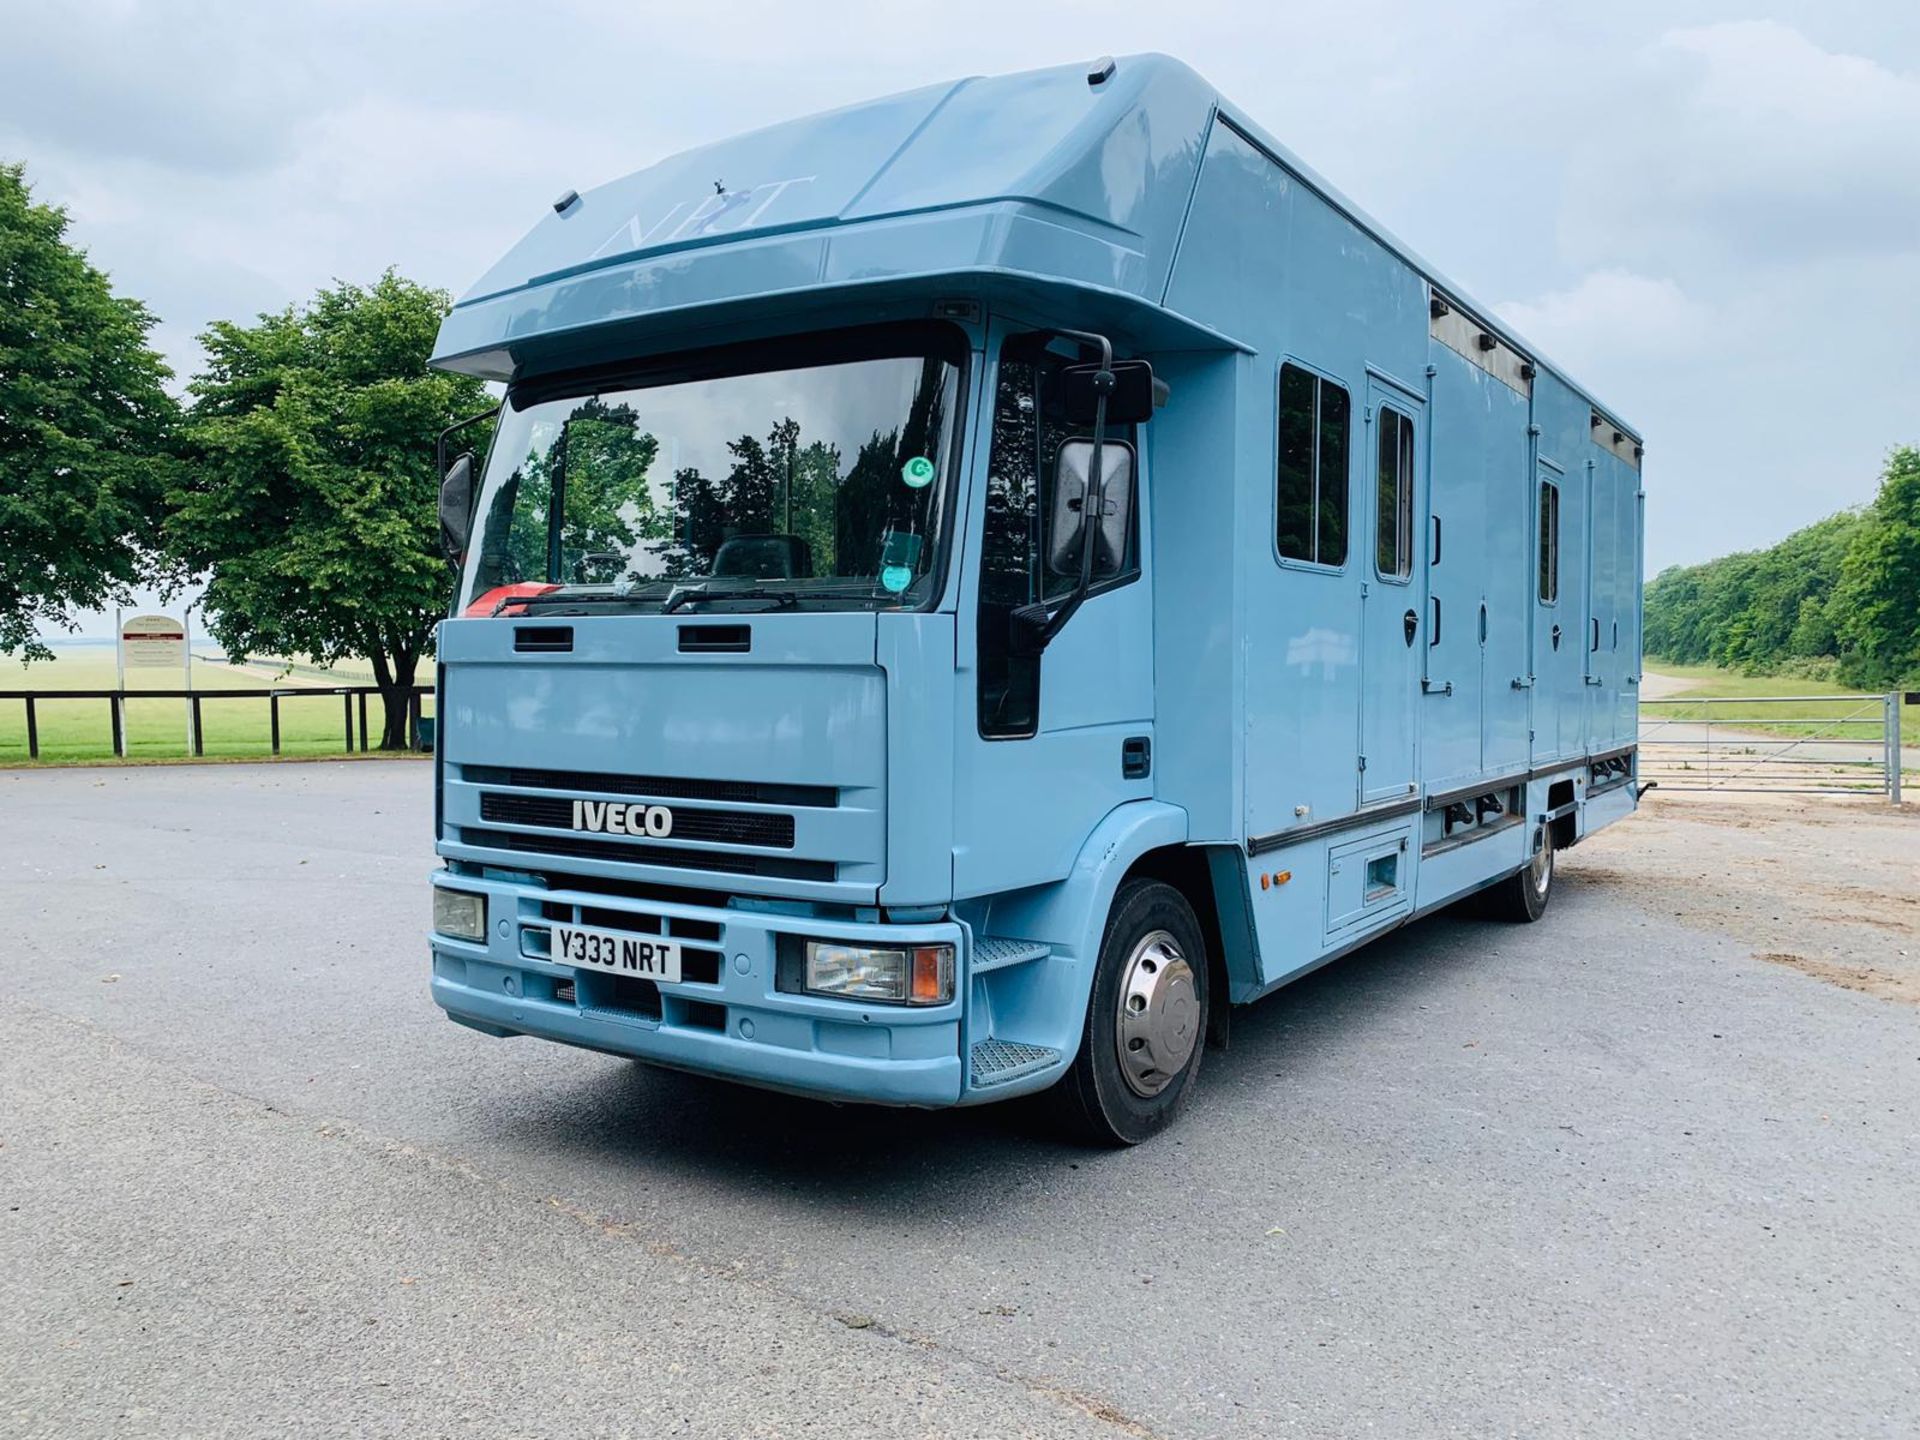 (RESERVE MET) Iveco 110E18 'OLYMPIC' Horsebox 2001 - 6 Speed - Fits 4/6 Forward Facing Horses - Image 2 of 26